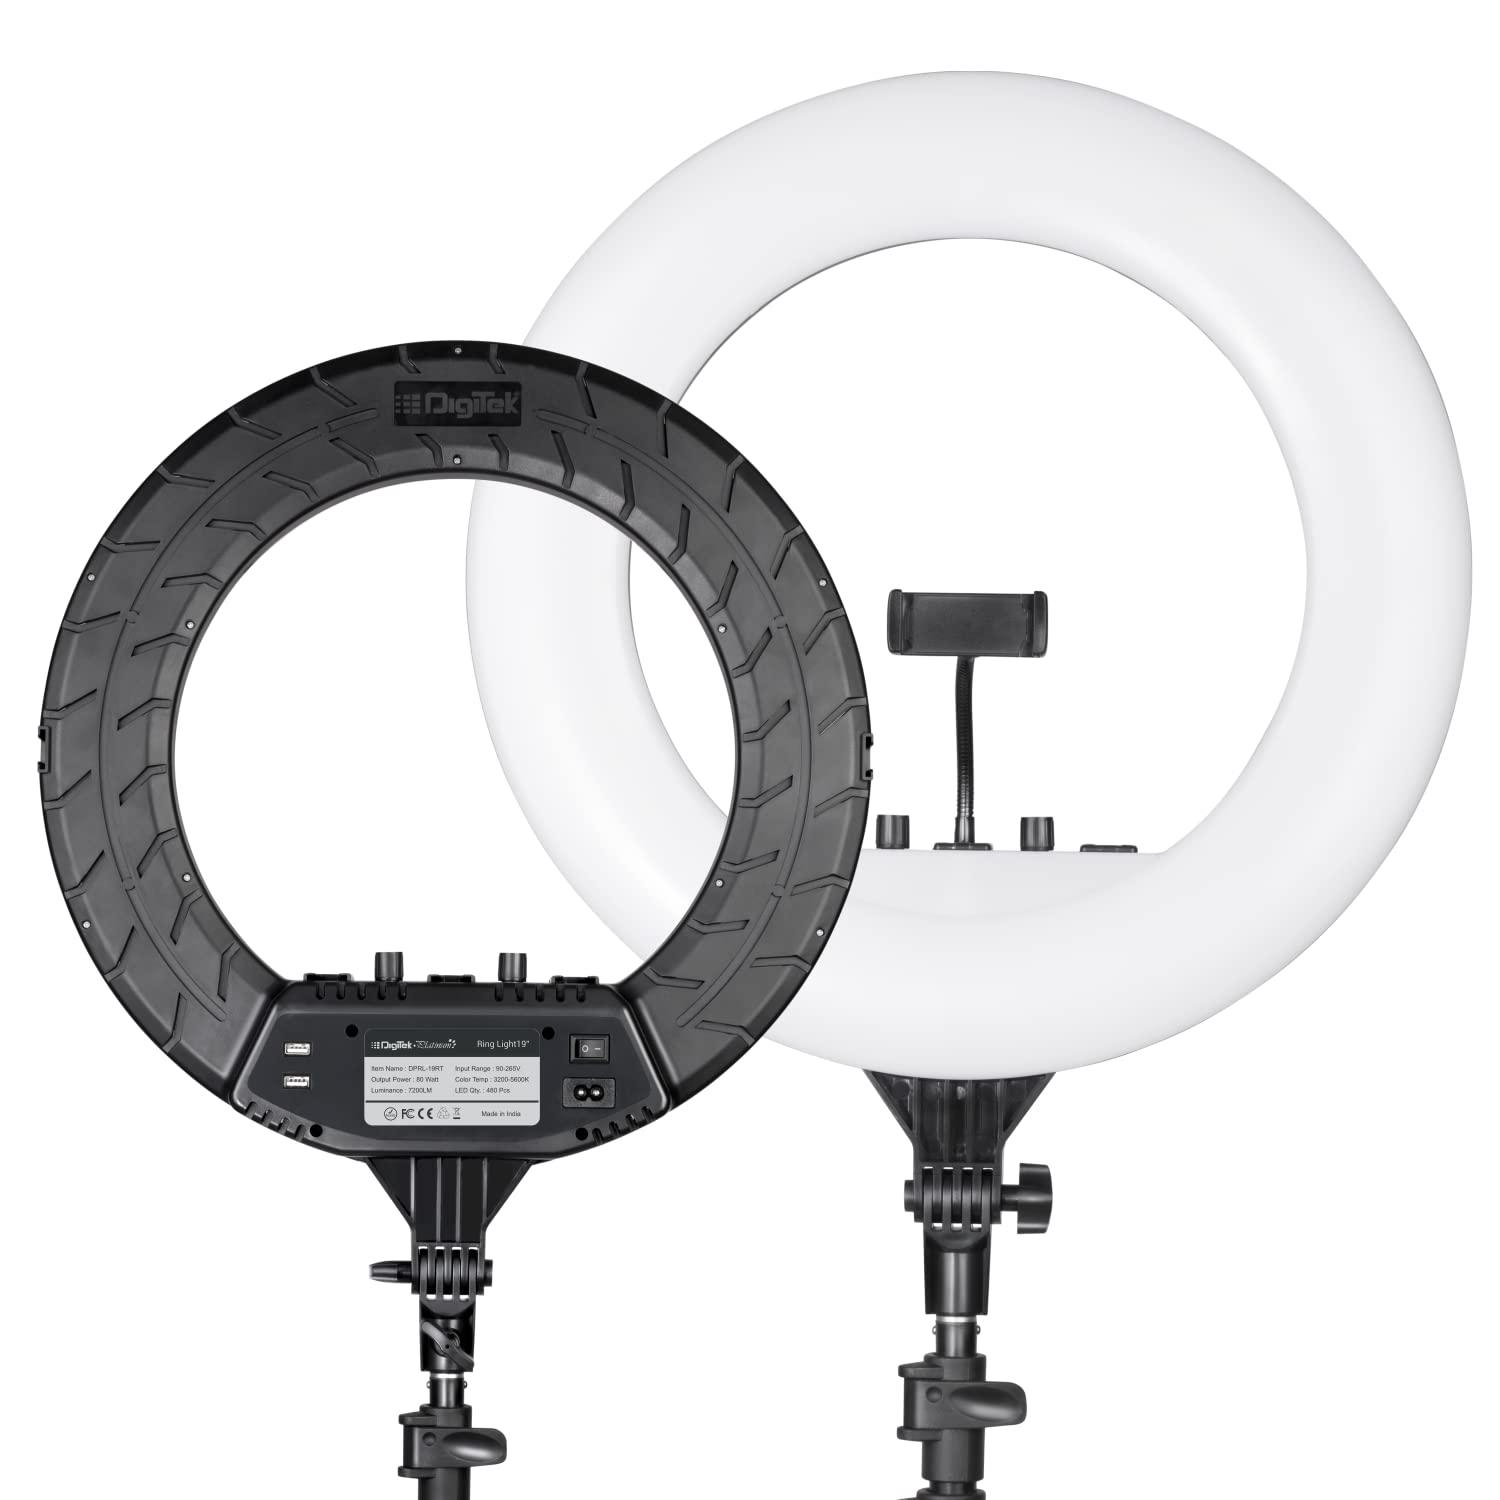 digitek platinum dprl 19rt professional led ring light runs on ac power with no shadow apertures ideal use for makeup video shoot fashion photography and many more digitek 3